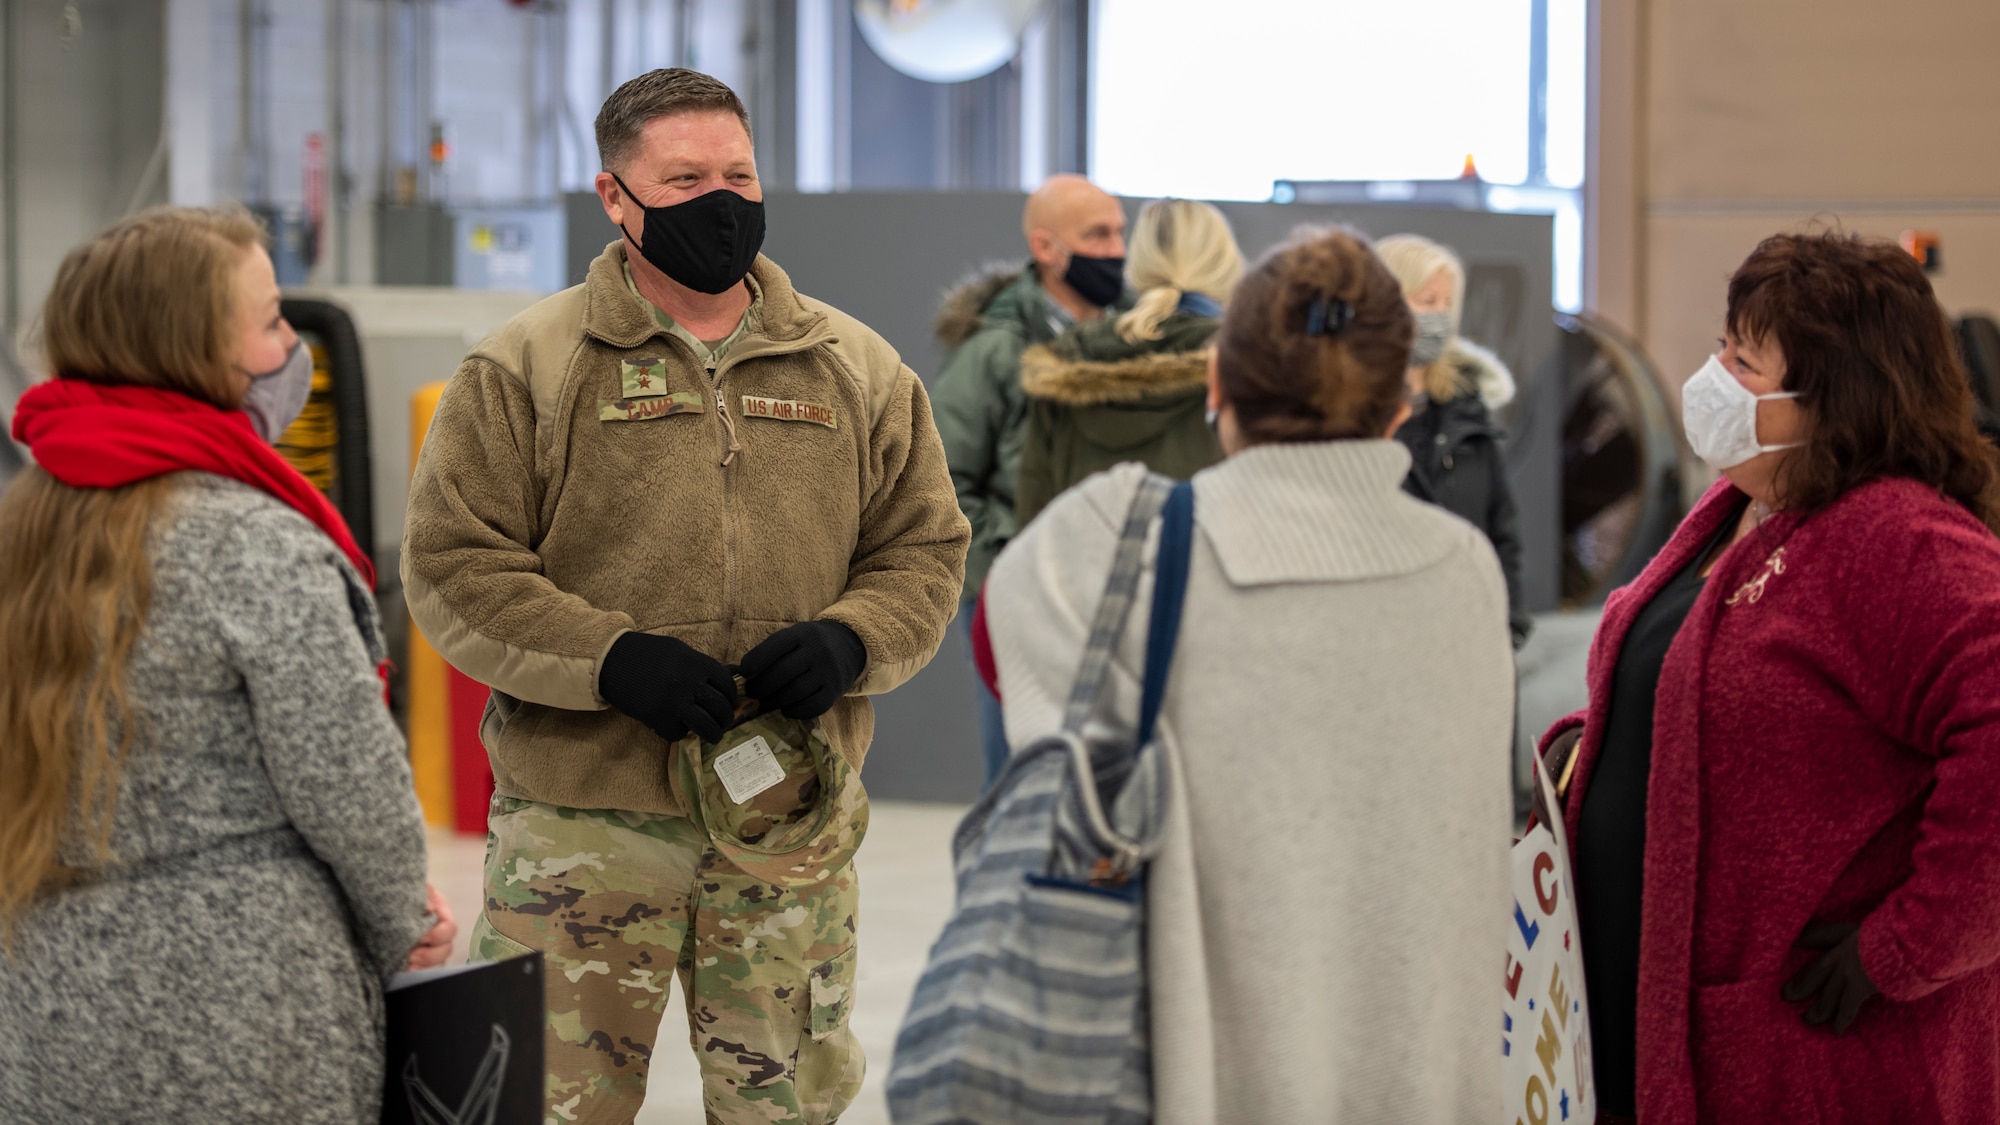 U.S. Air Force Maj. Gen. James Camp, Ohio’s Assistant Adjutant General, speaks to family members of deployed Airmen assigned to the Ohio National Guard’s 180th Fighter Wing, Jan. 26, 2020 at the 180FW in Swanton, Ohio.